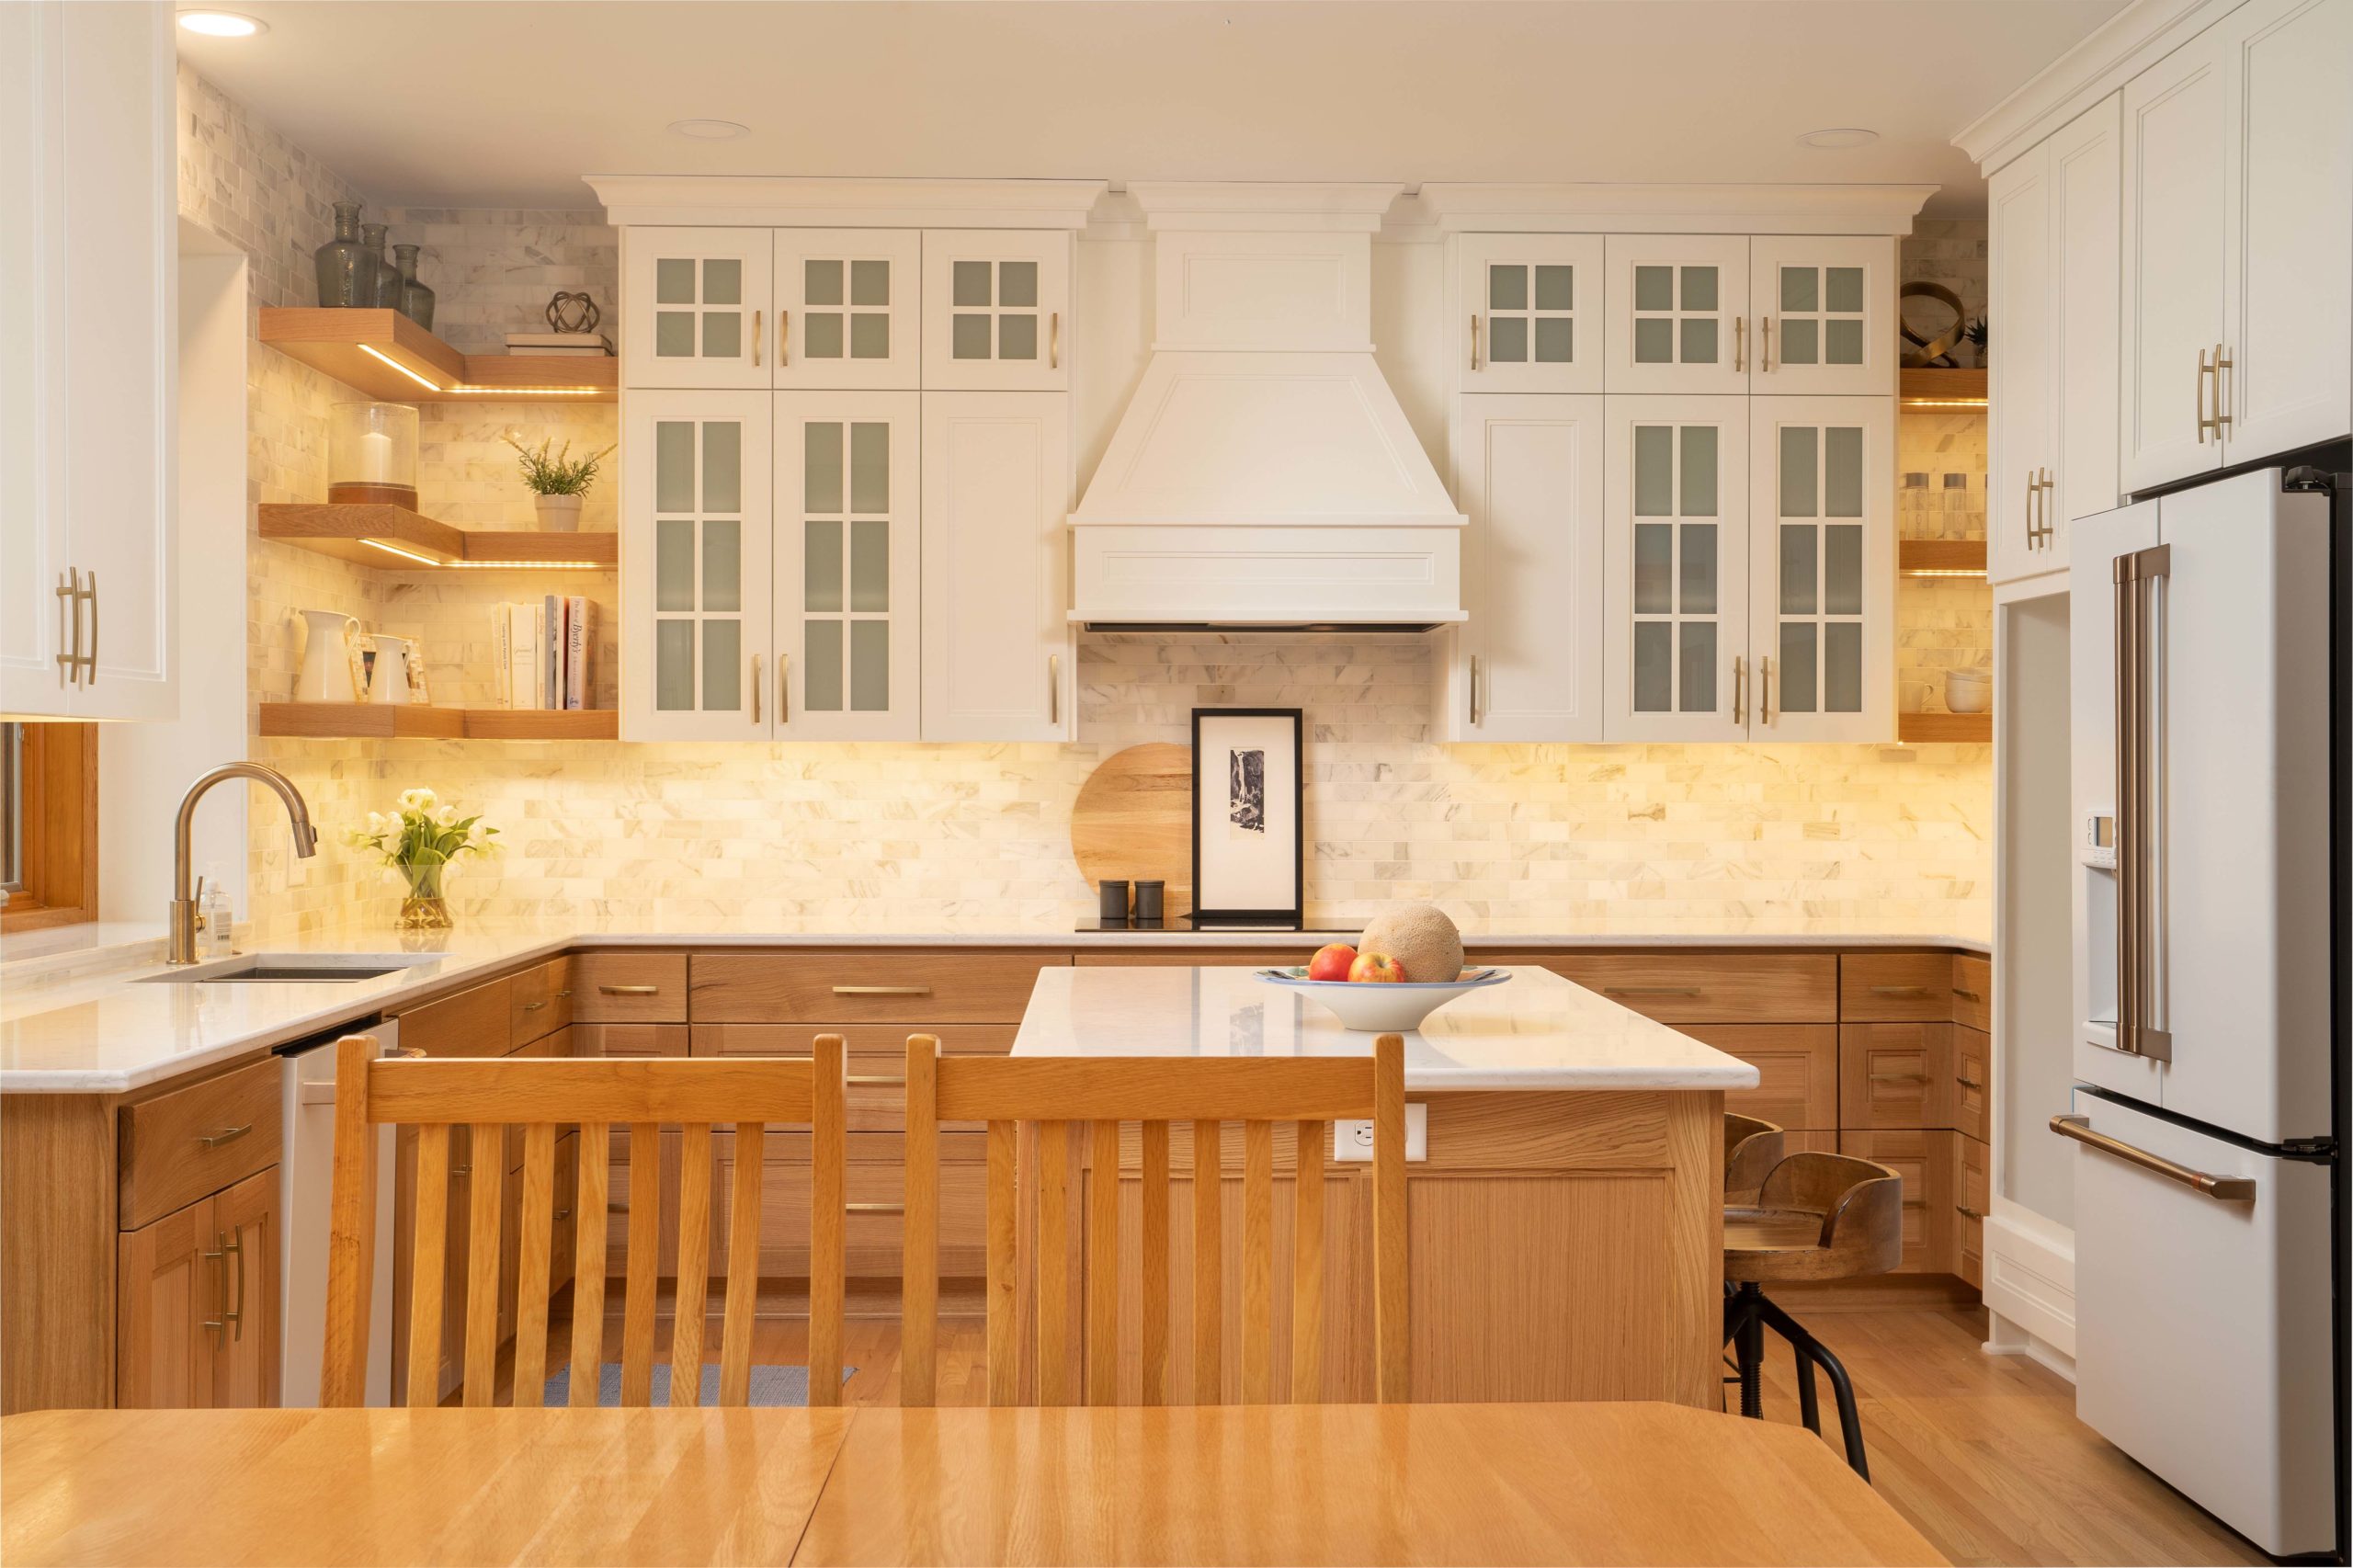 A kitchen remodel with white cabinets and wood counter tops.